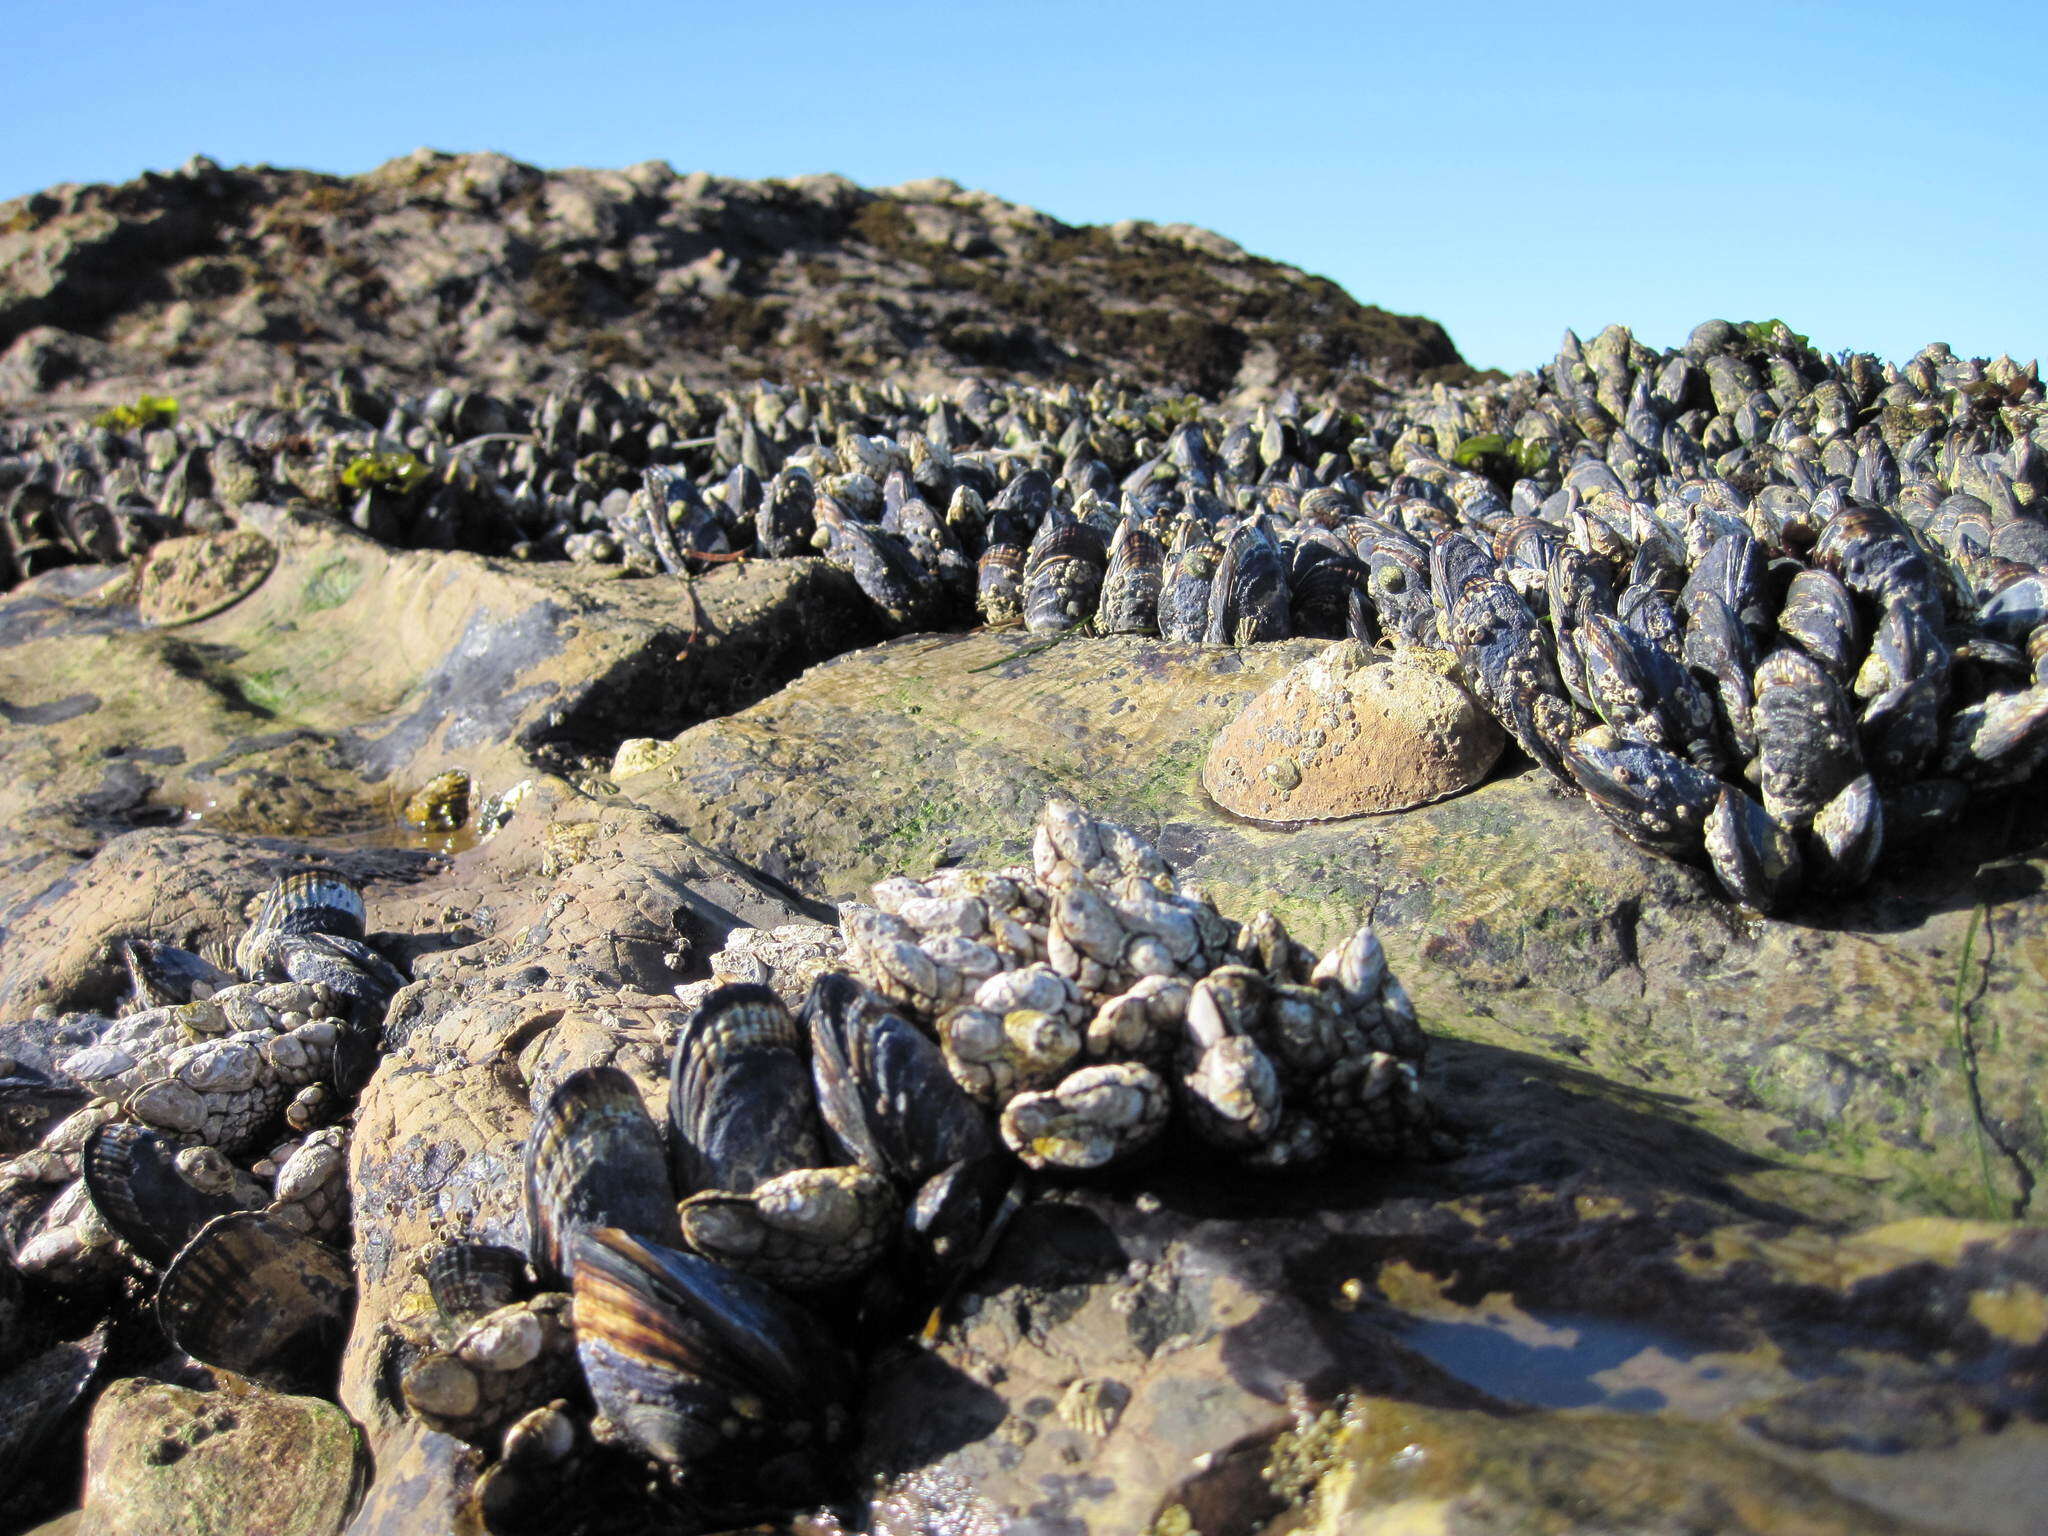 Image of goose-necked barnacle